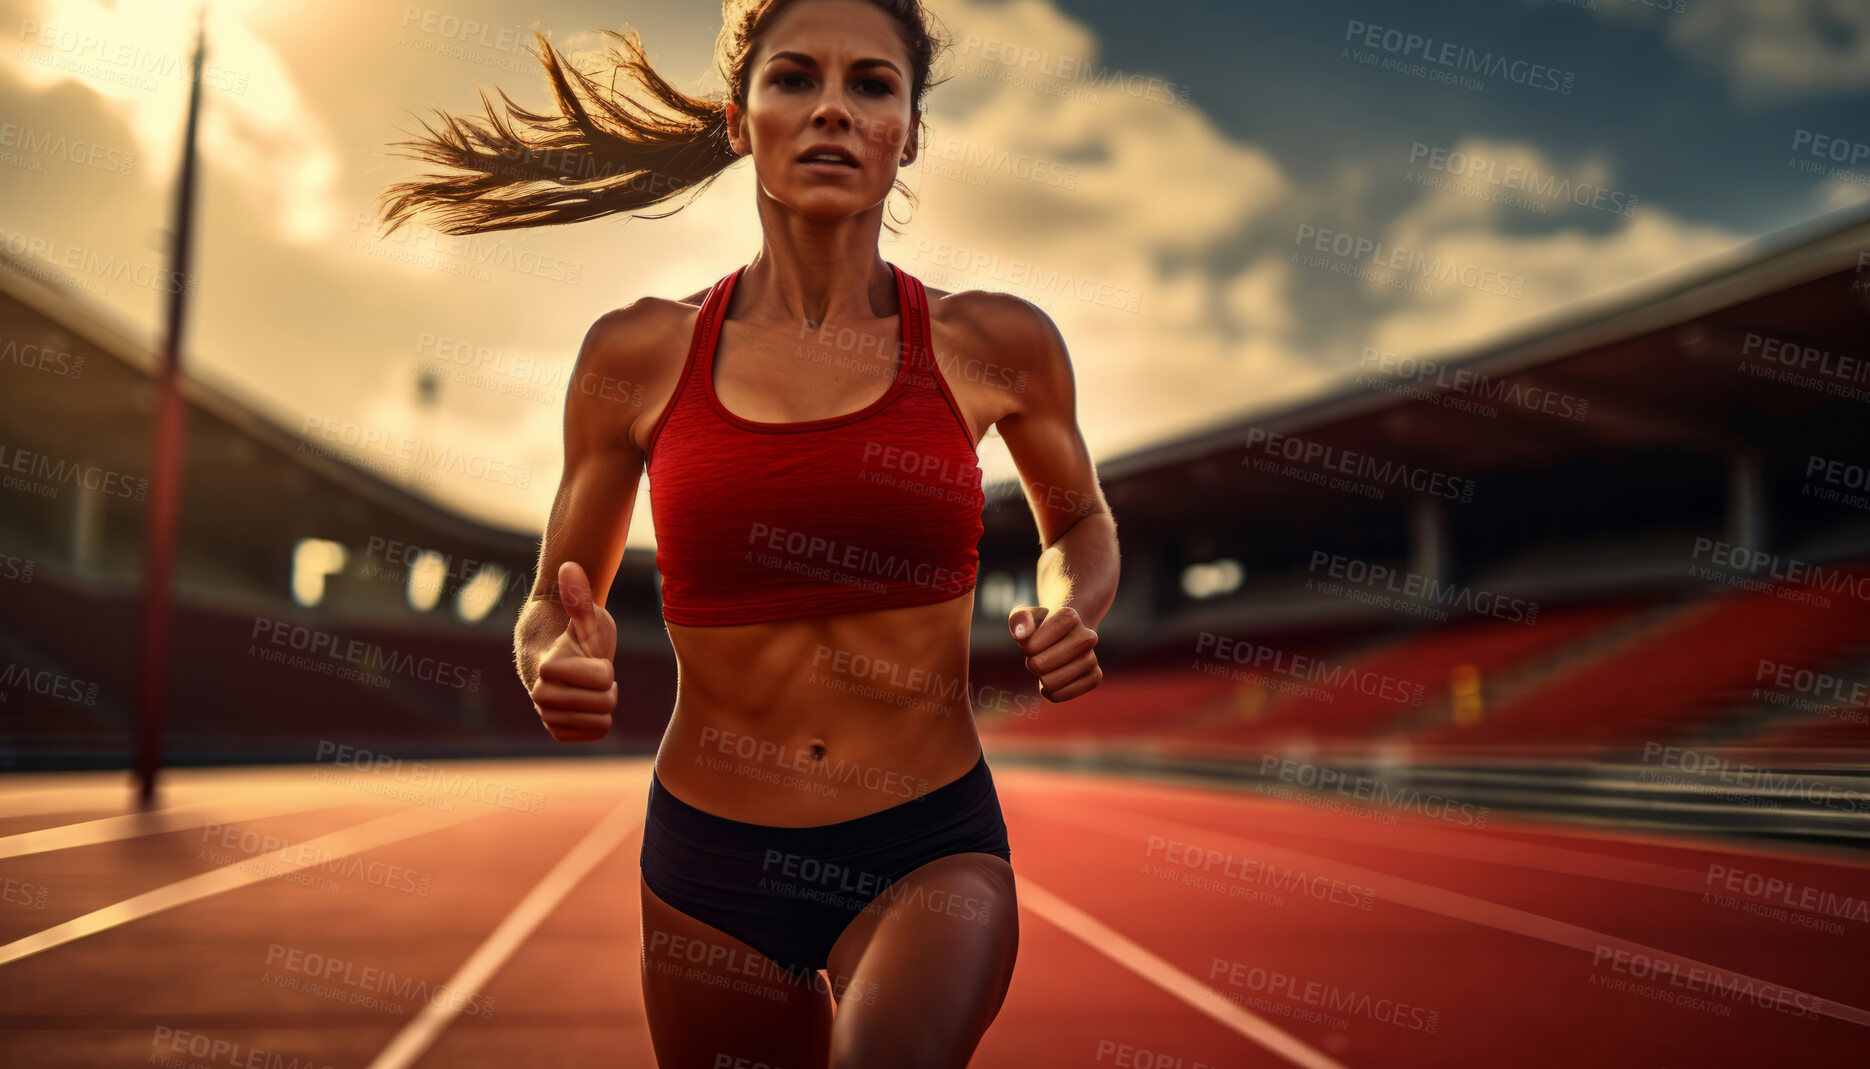 Buy stock photo Shot of young, fit woman running on track. Fitness, sport, runner Concept.